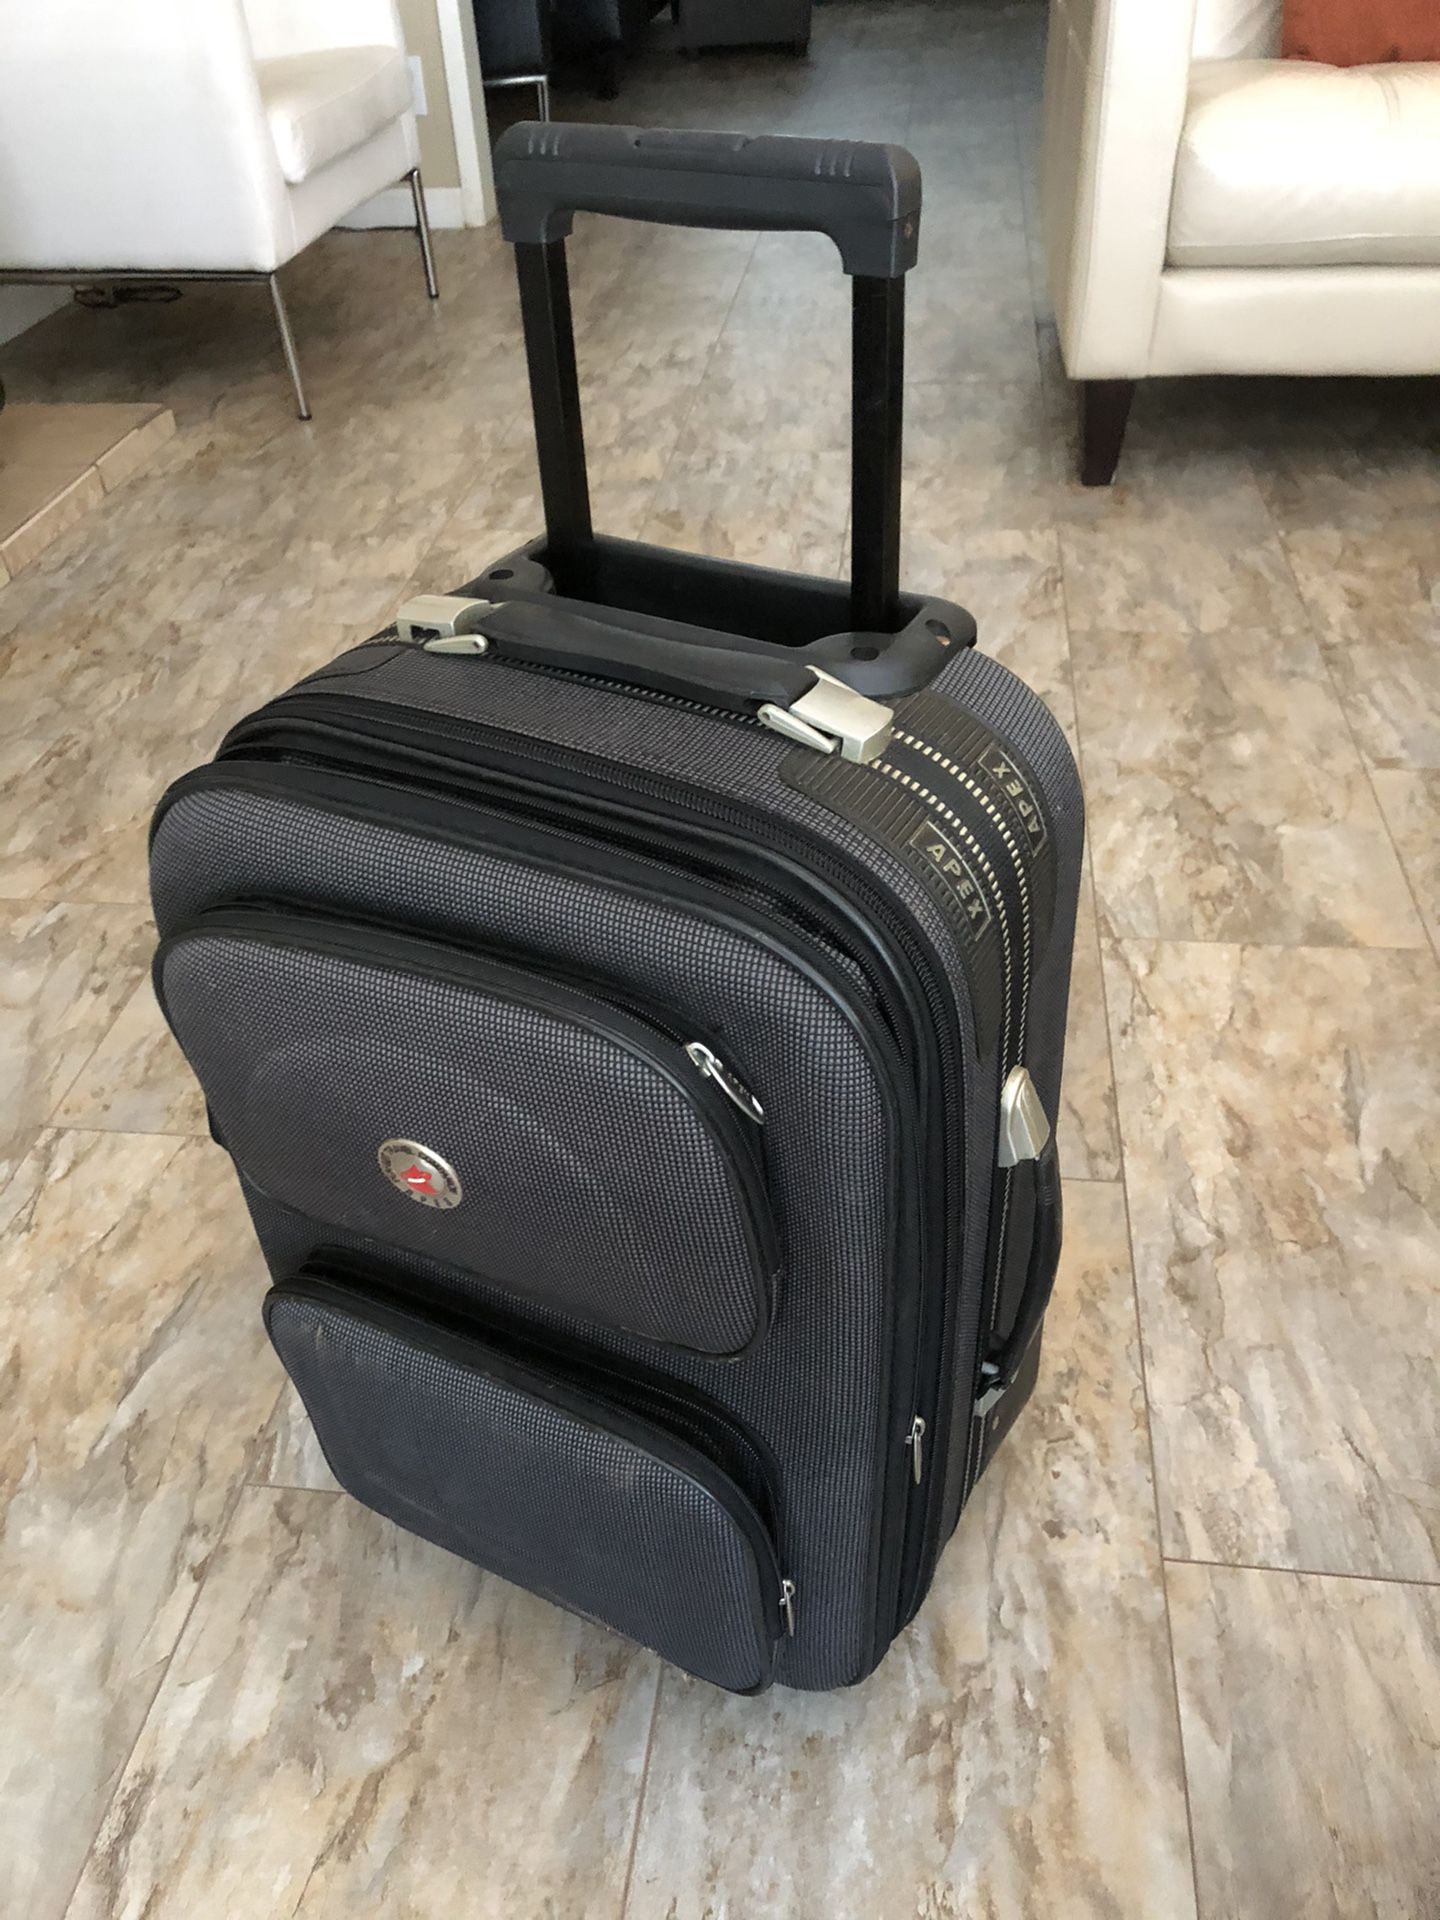 Luggage carry on 20”